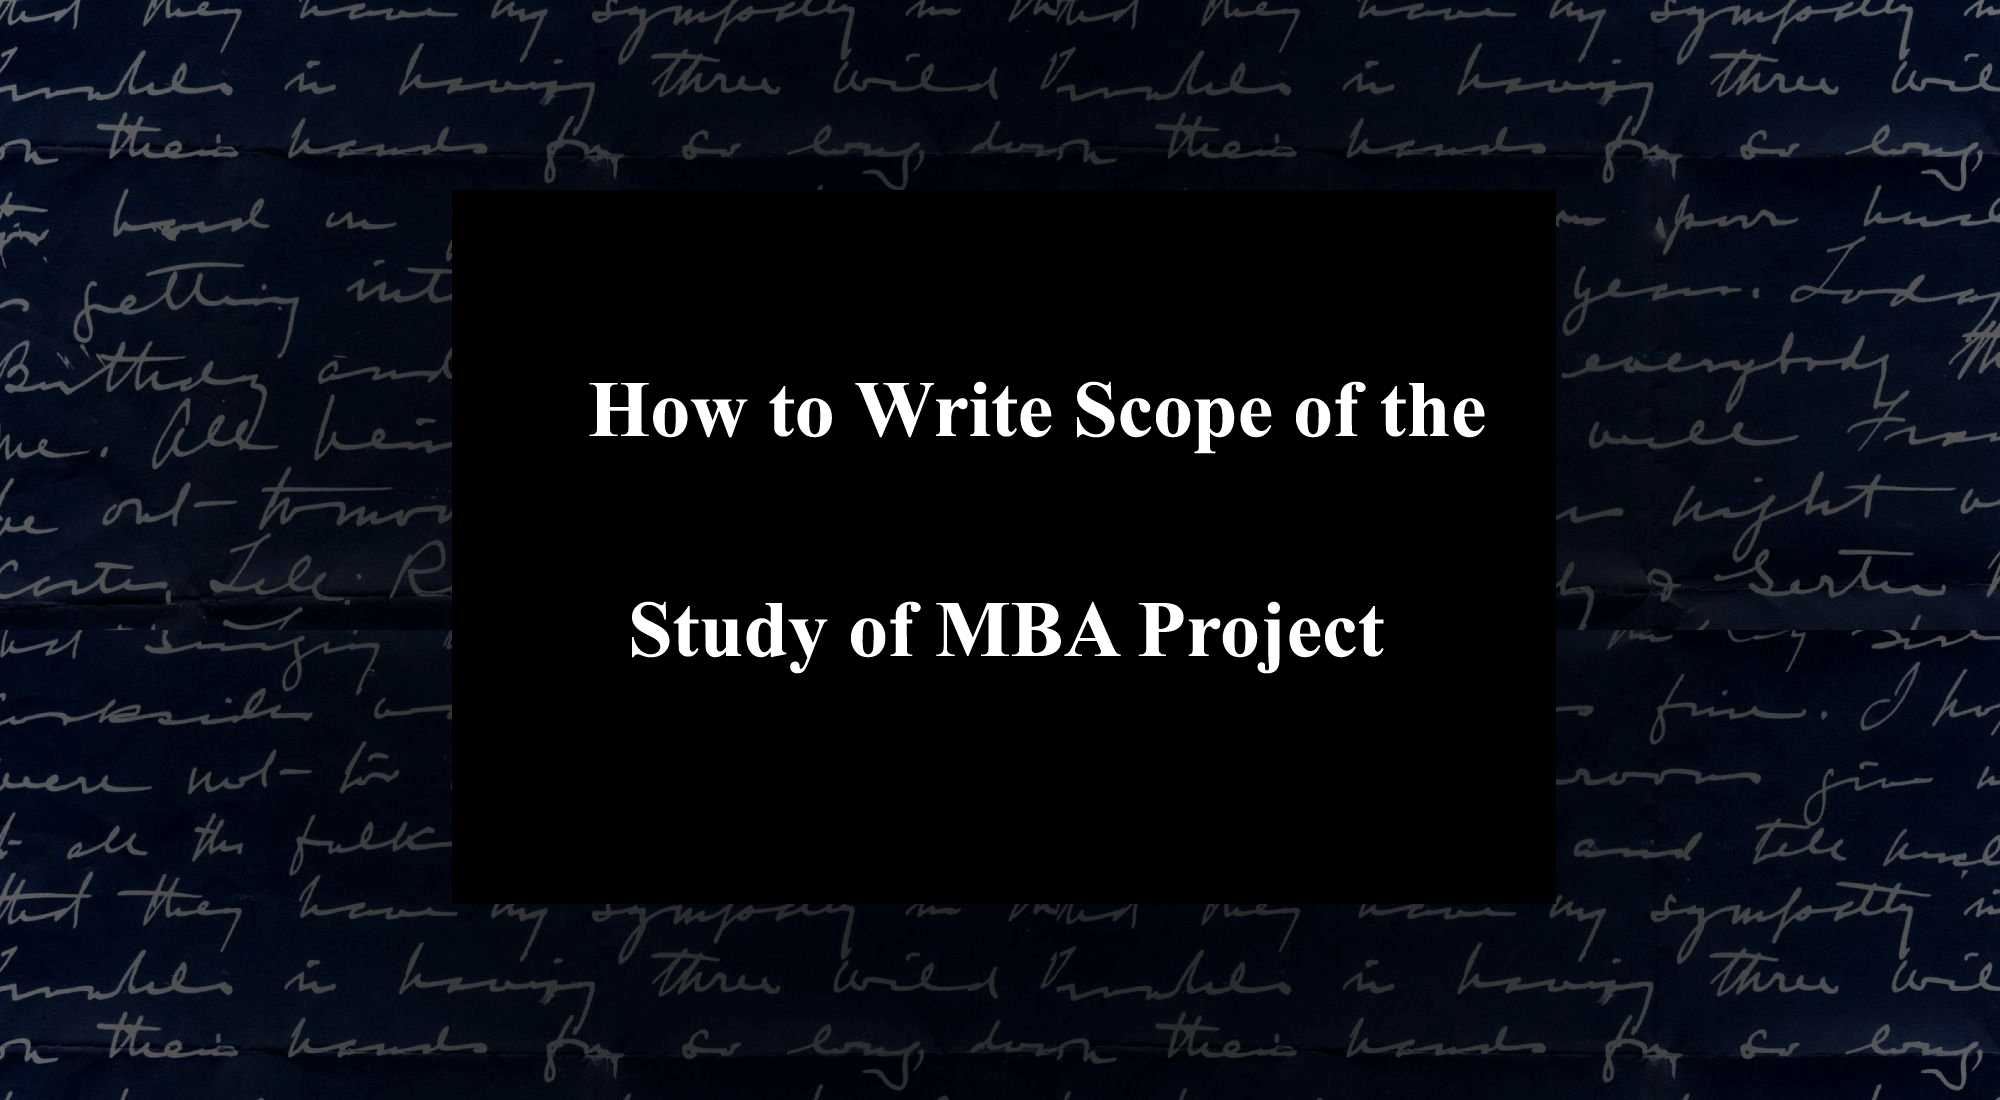 How to Write Scope of the Study